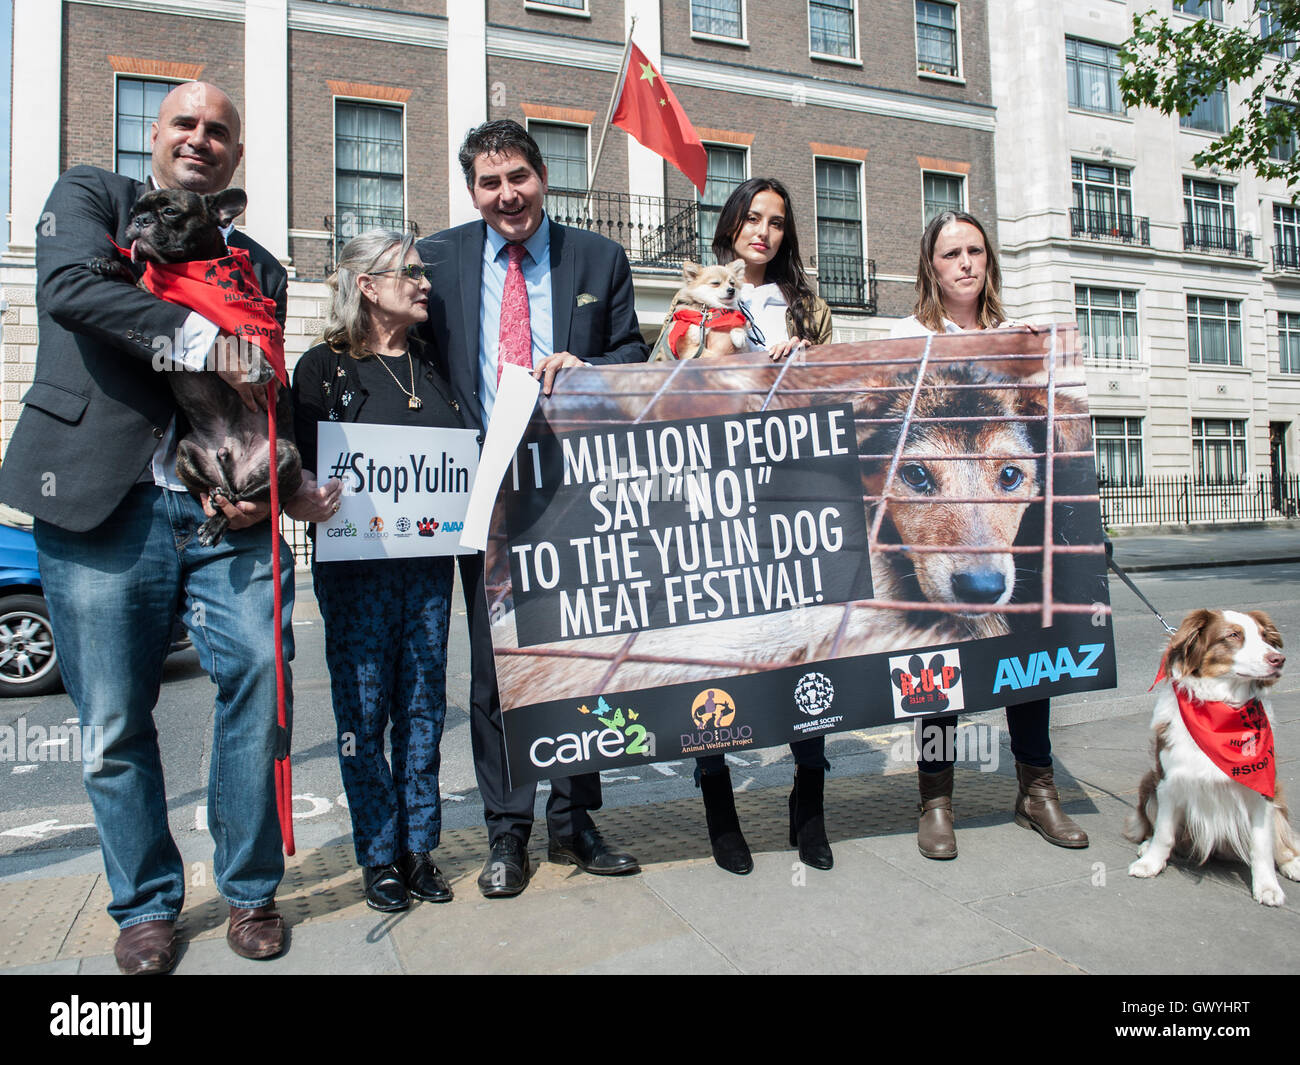 Actress Carrie Fisher who plays Princess Lea in the Star Wars movies joins activists to protest against the Chinese Yulin Dog Meat Festival. Protesters gathered at the Chinese Embassy in London and an attempt was made to hand in an a 11 million signature Stock Photo